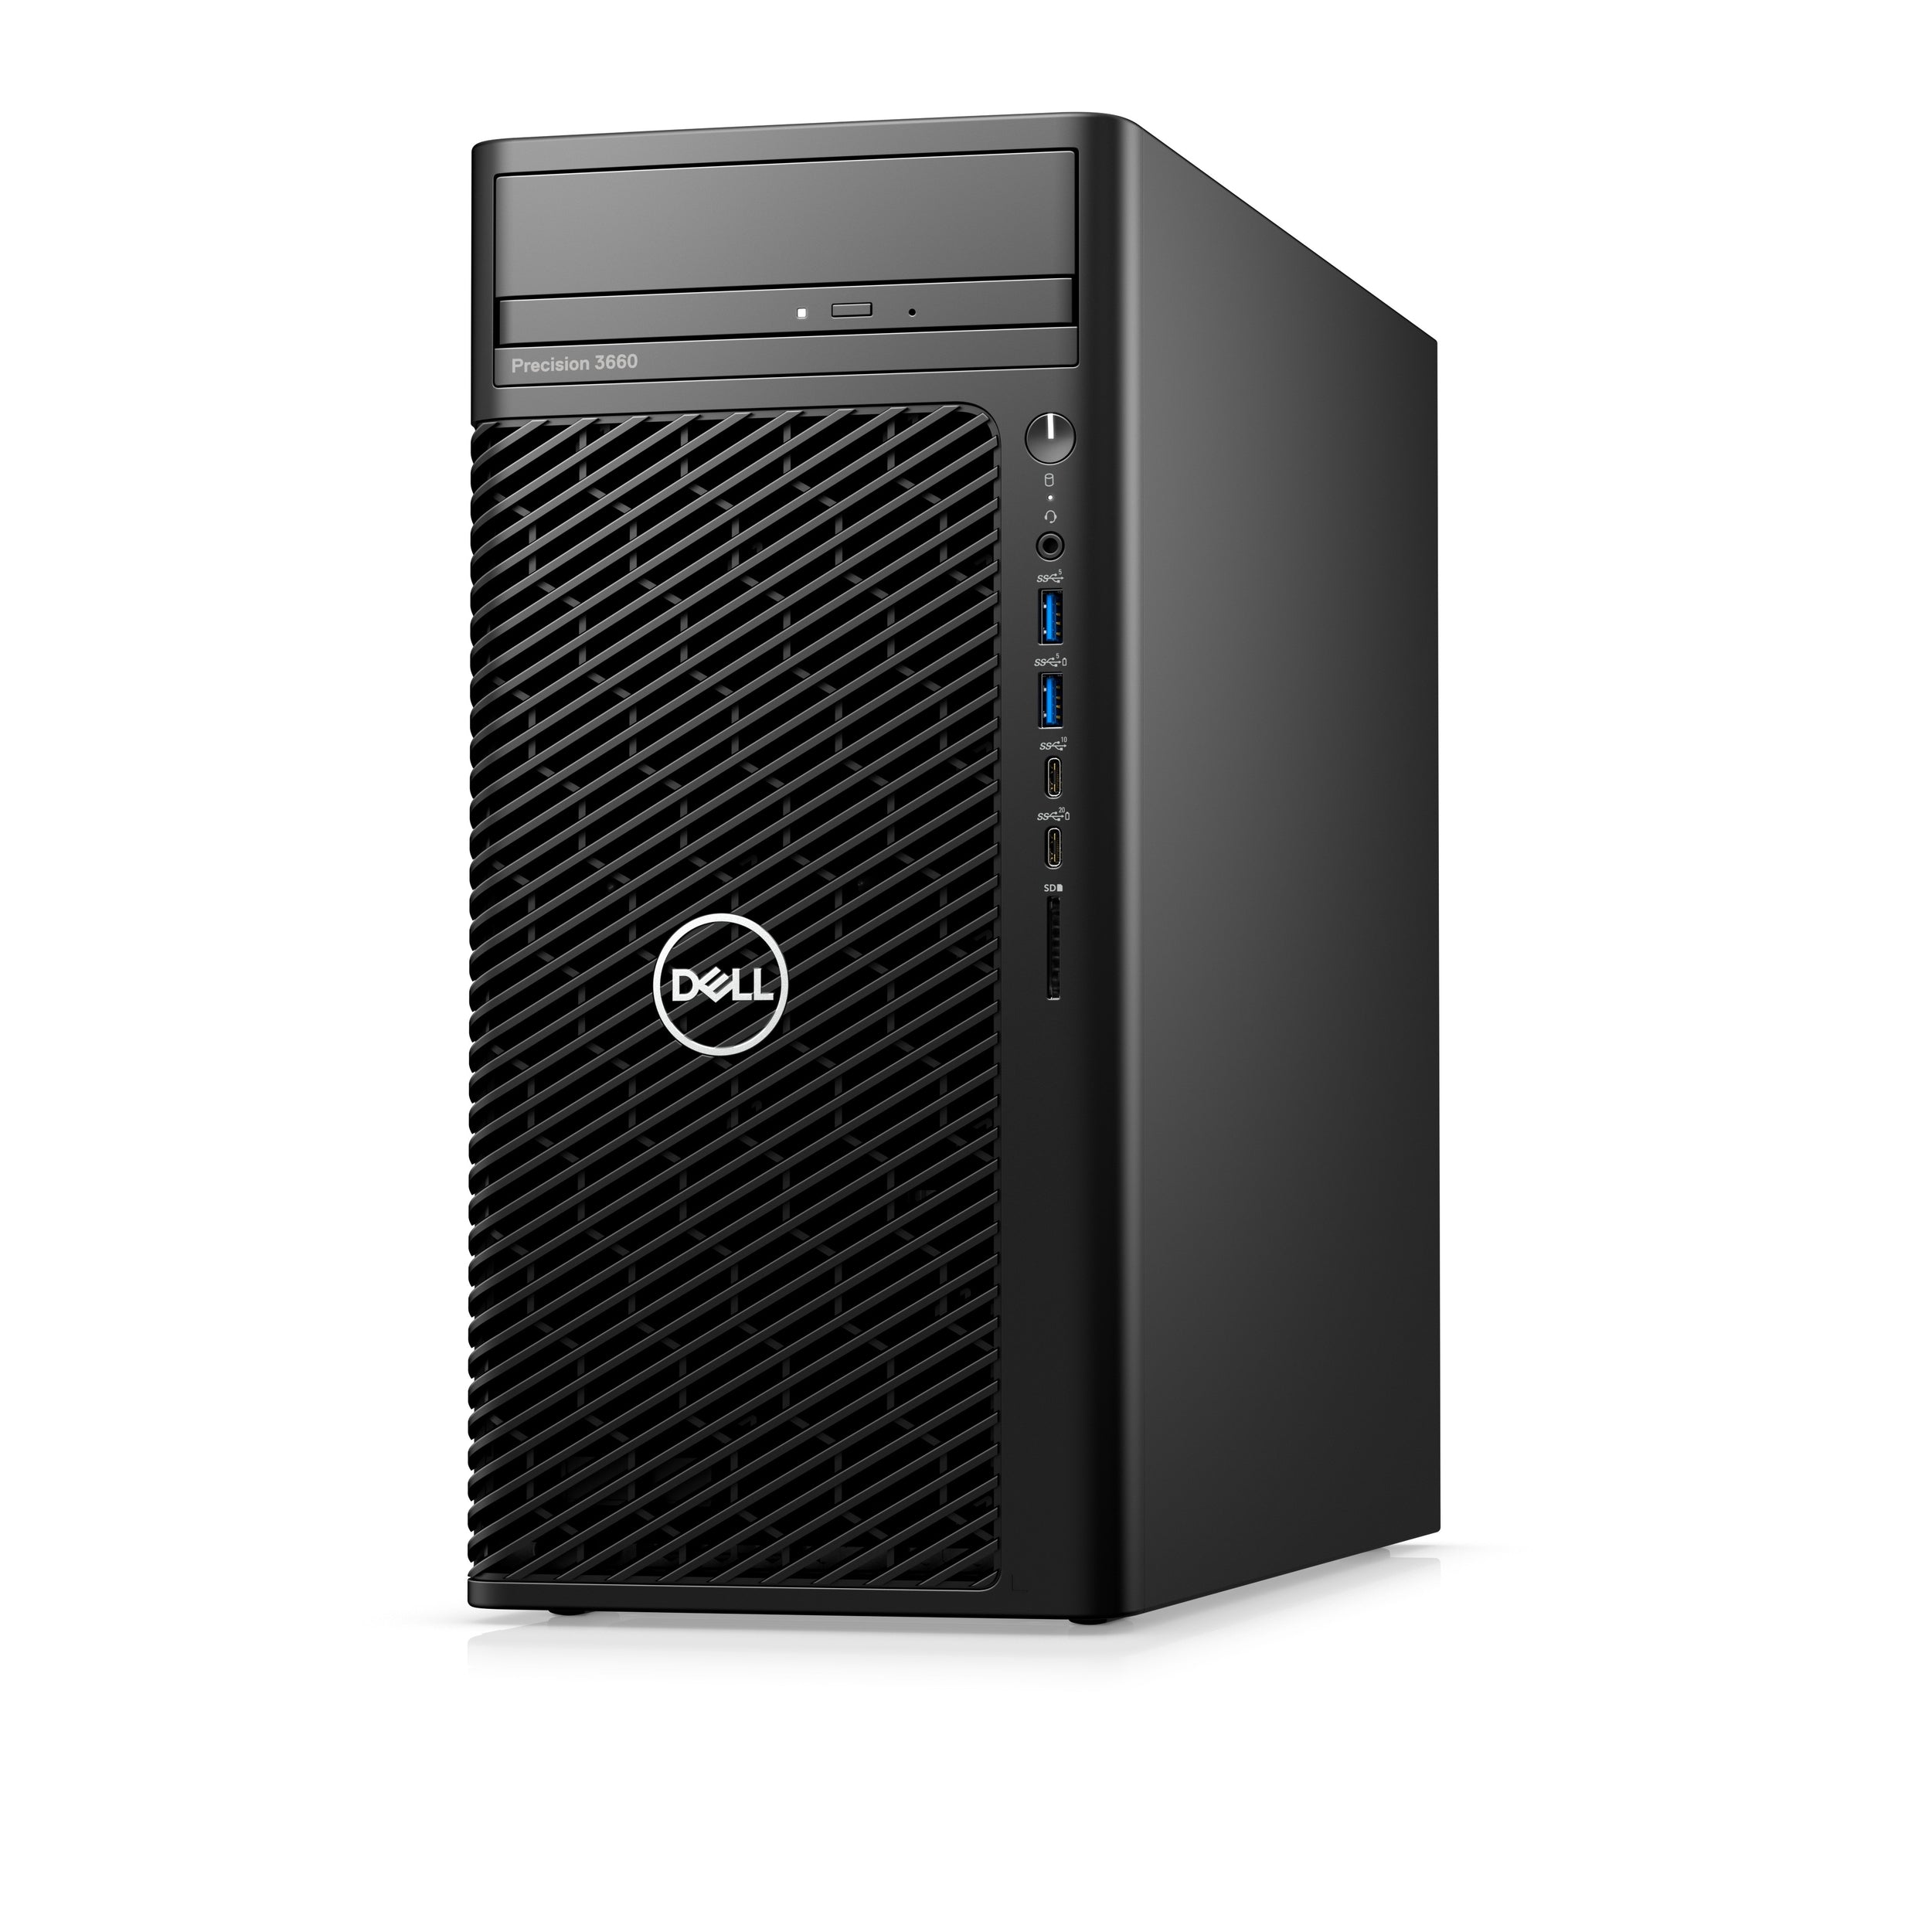 Workstation Dell 3660 Precision 3660I7-12700K16 Gb1 Tb(Hdd 2.5)+256 Ssdnvidia T400W10 Proteclado+Mouse 3Y Prosupport Nbd.